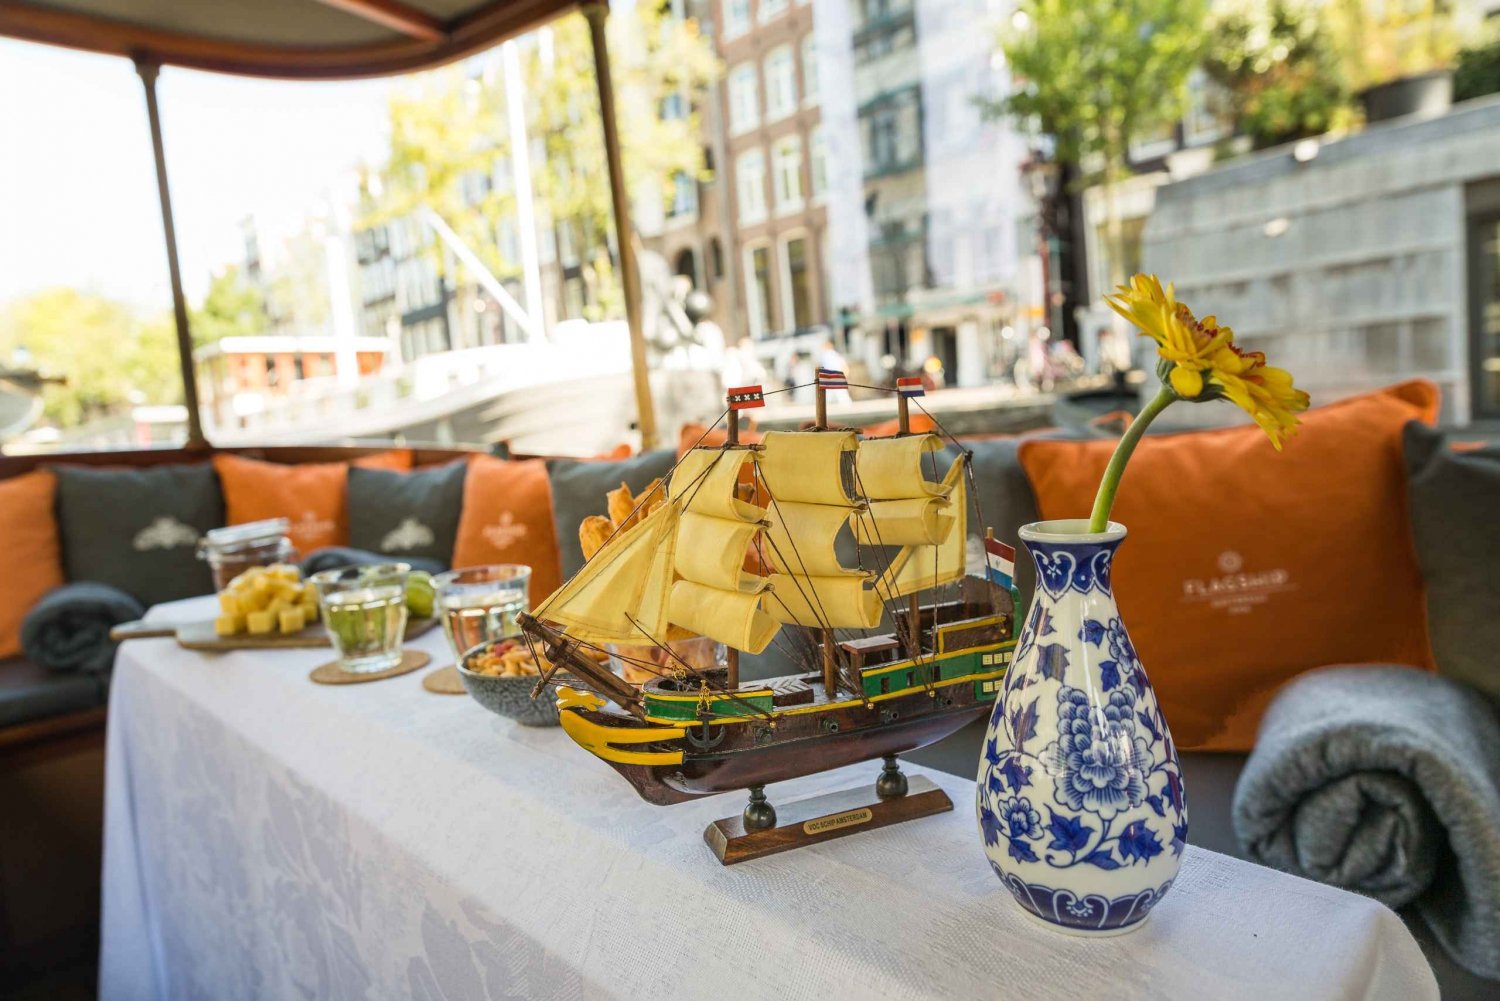 Amsterdam: Classic Boat Cruise with Cheese & Wine Option